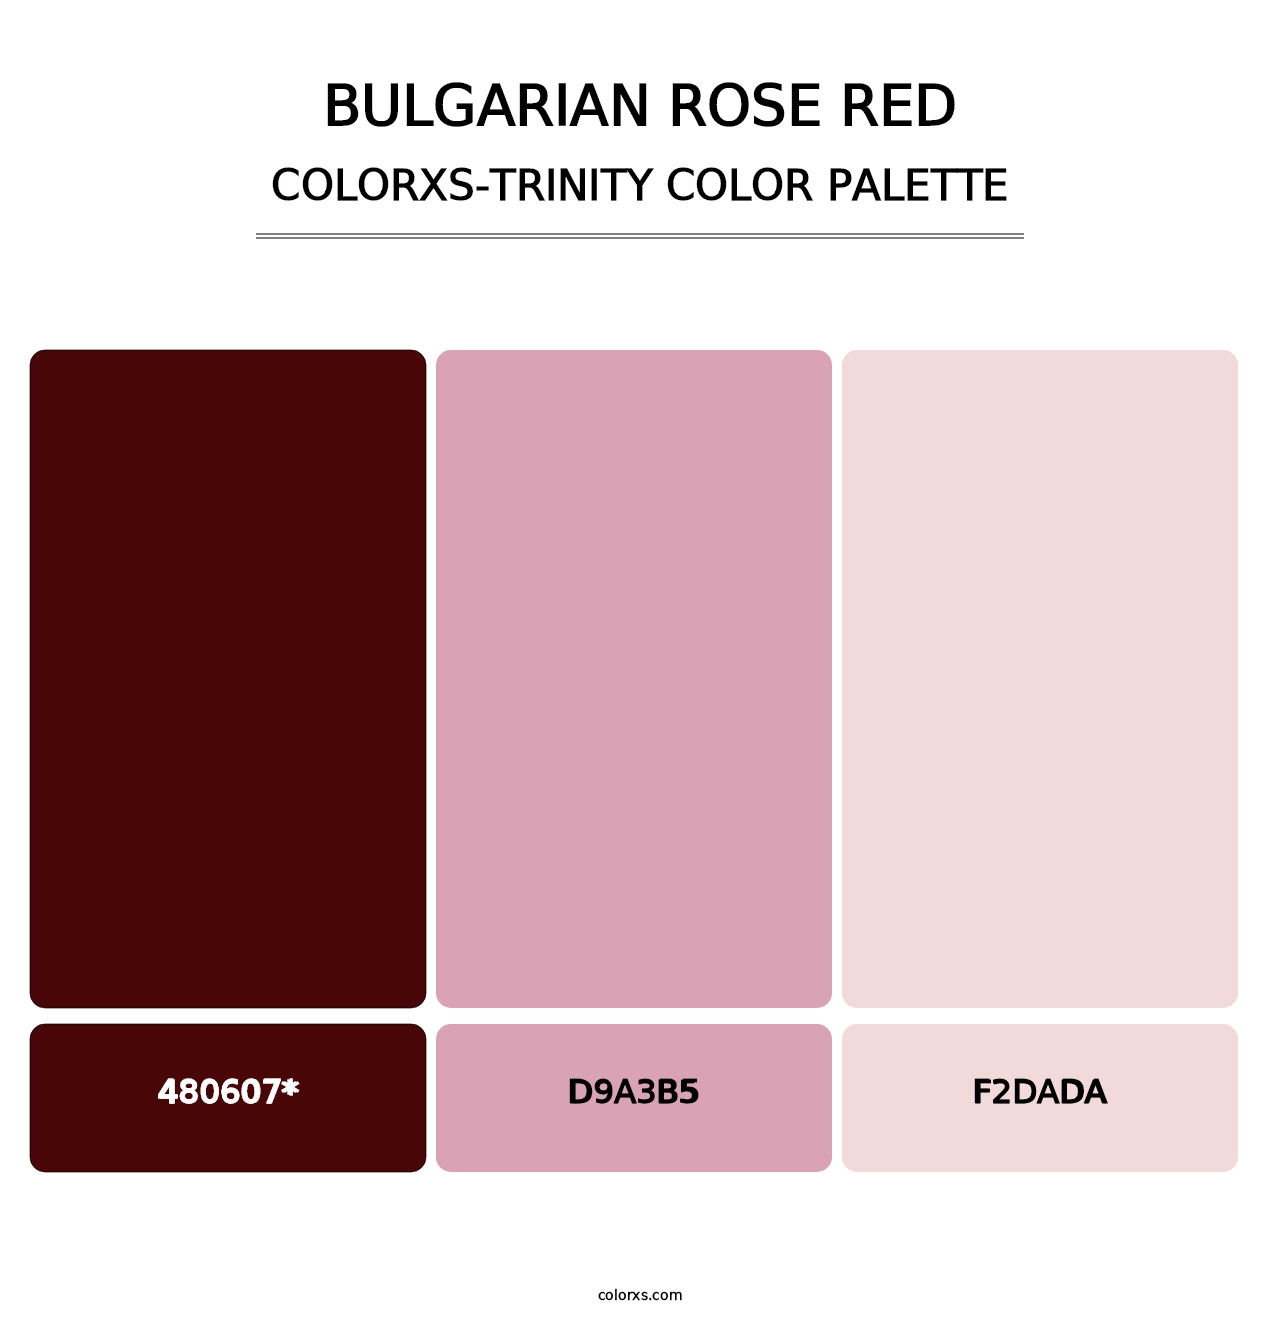 Bulgarian Rose Red - Colorxs Trinity Palette